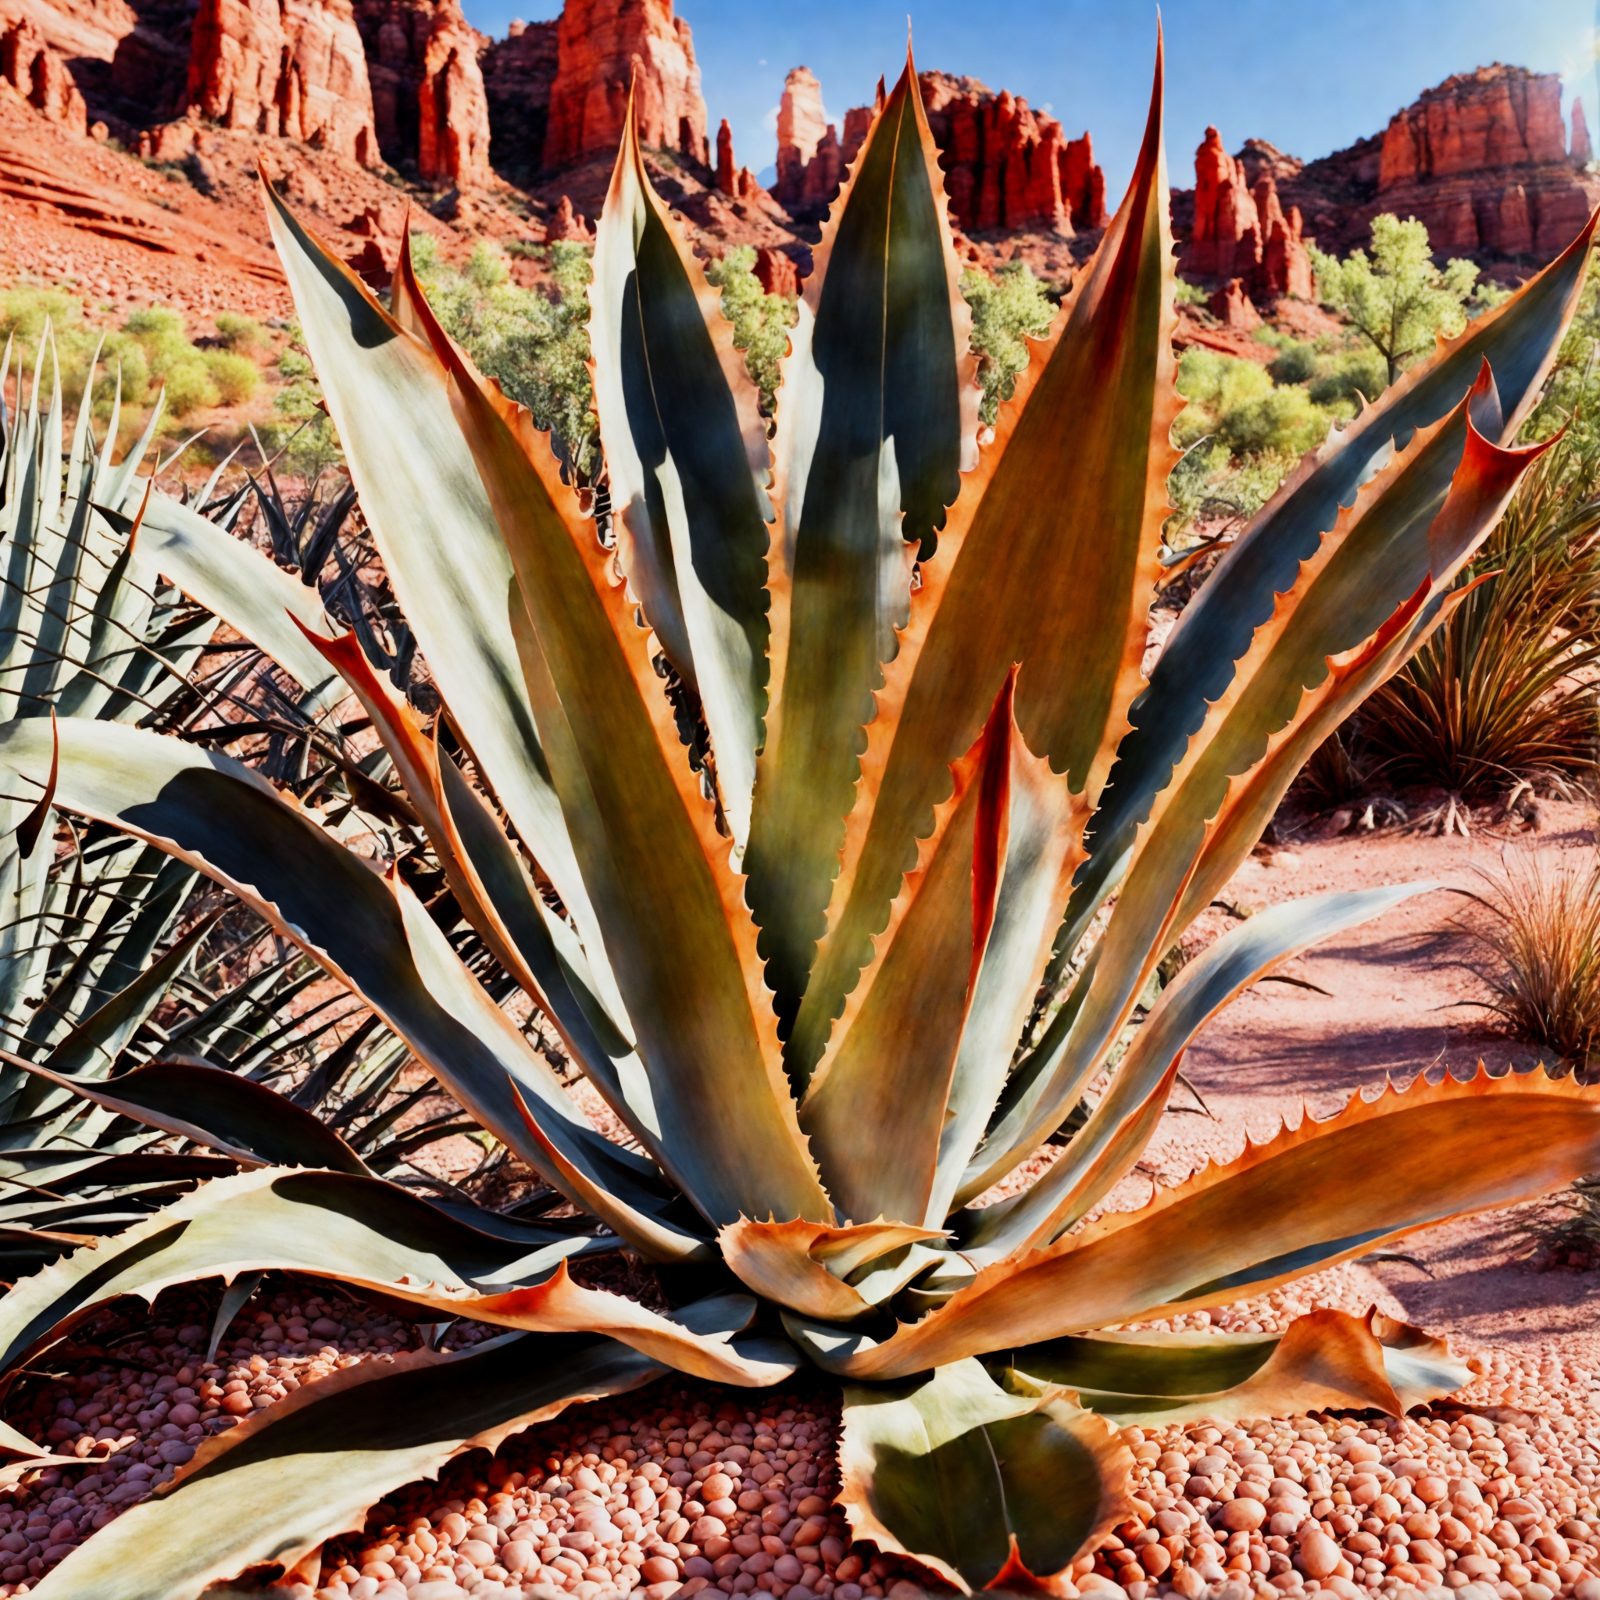 Agave americana plant in Arizona desert, bright sunlight, surrounded by native flora and red rocks.